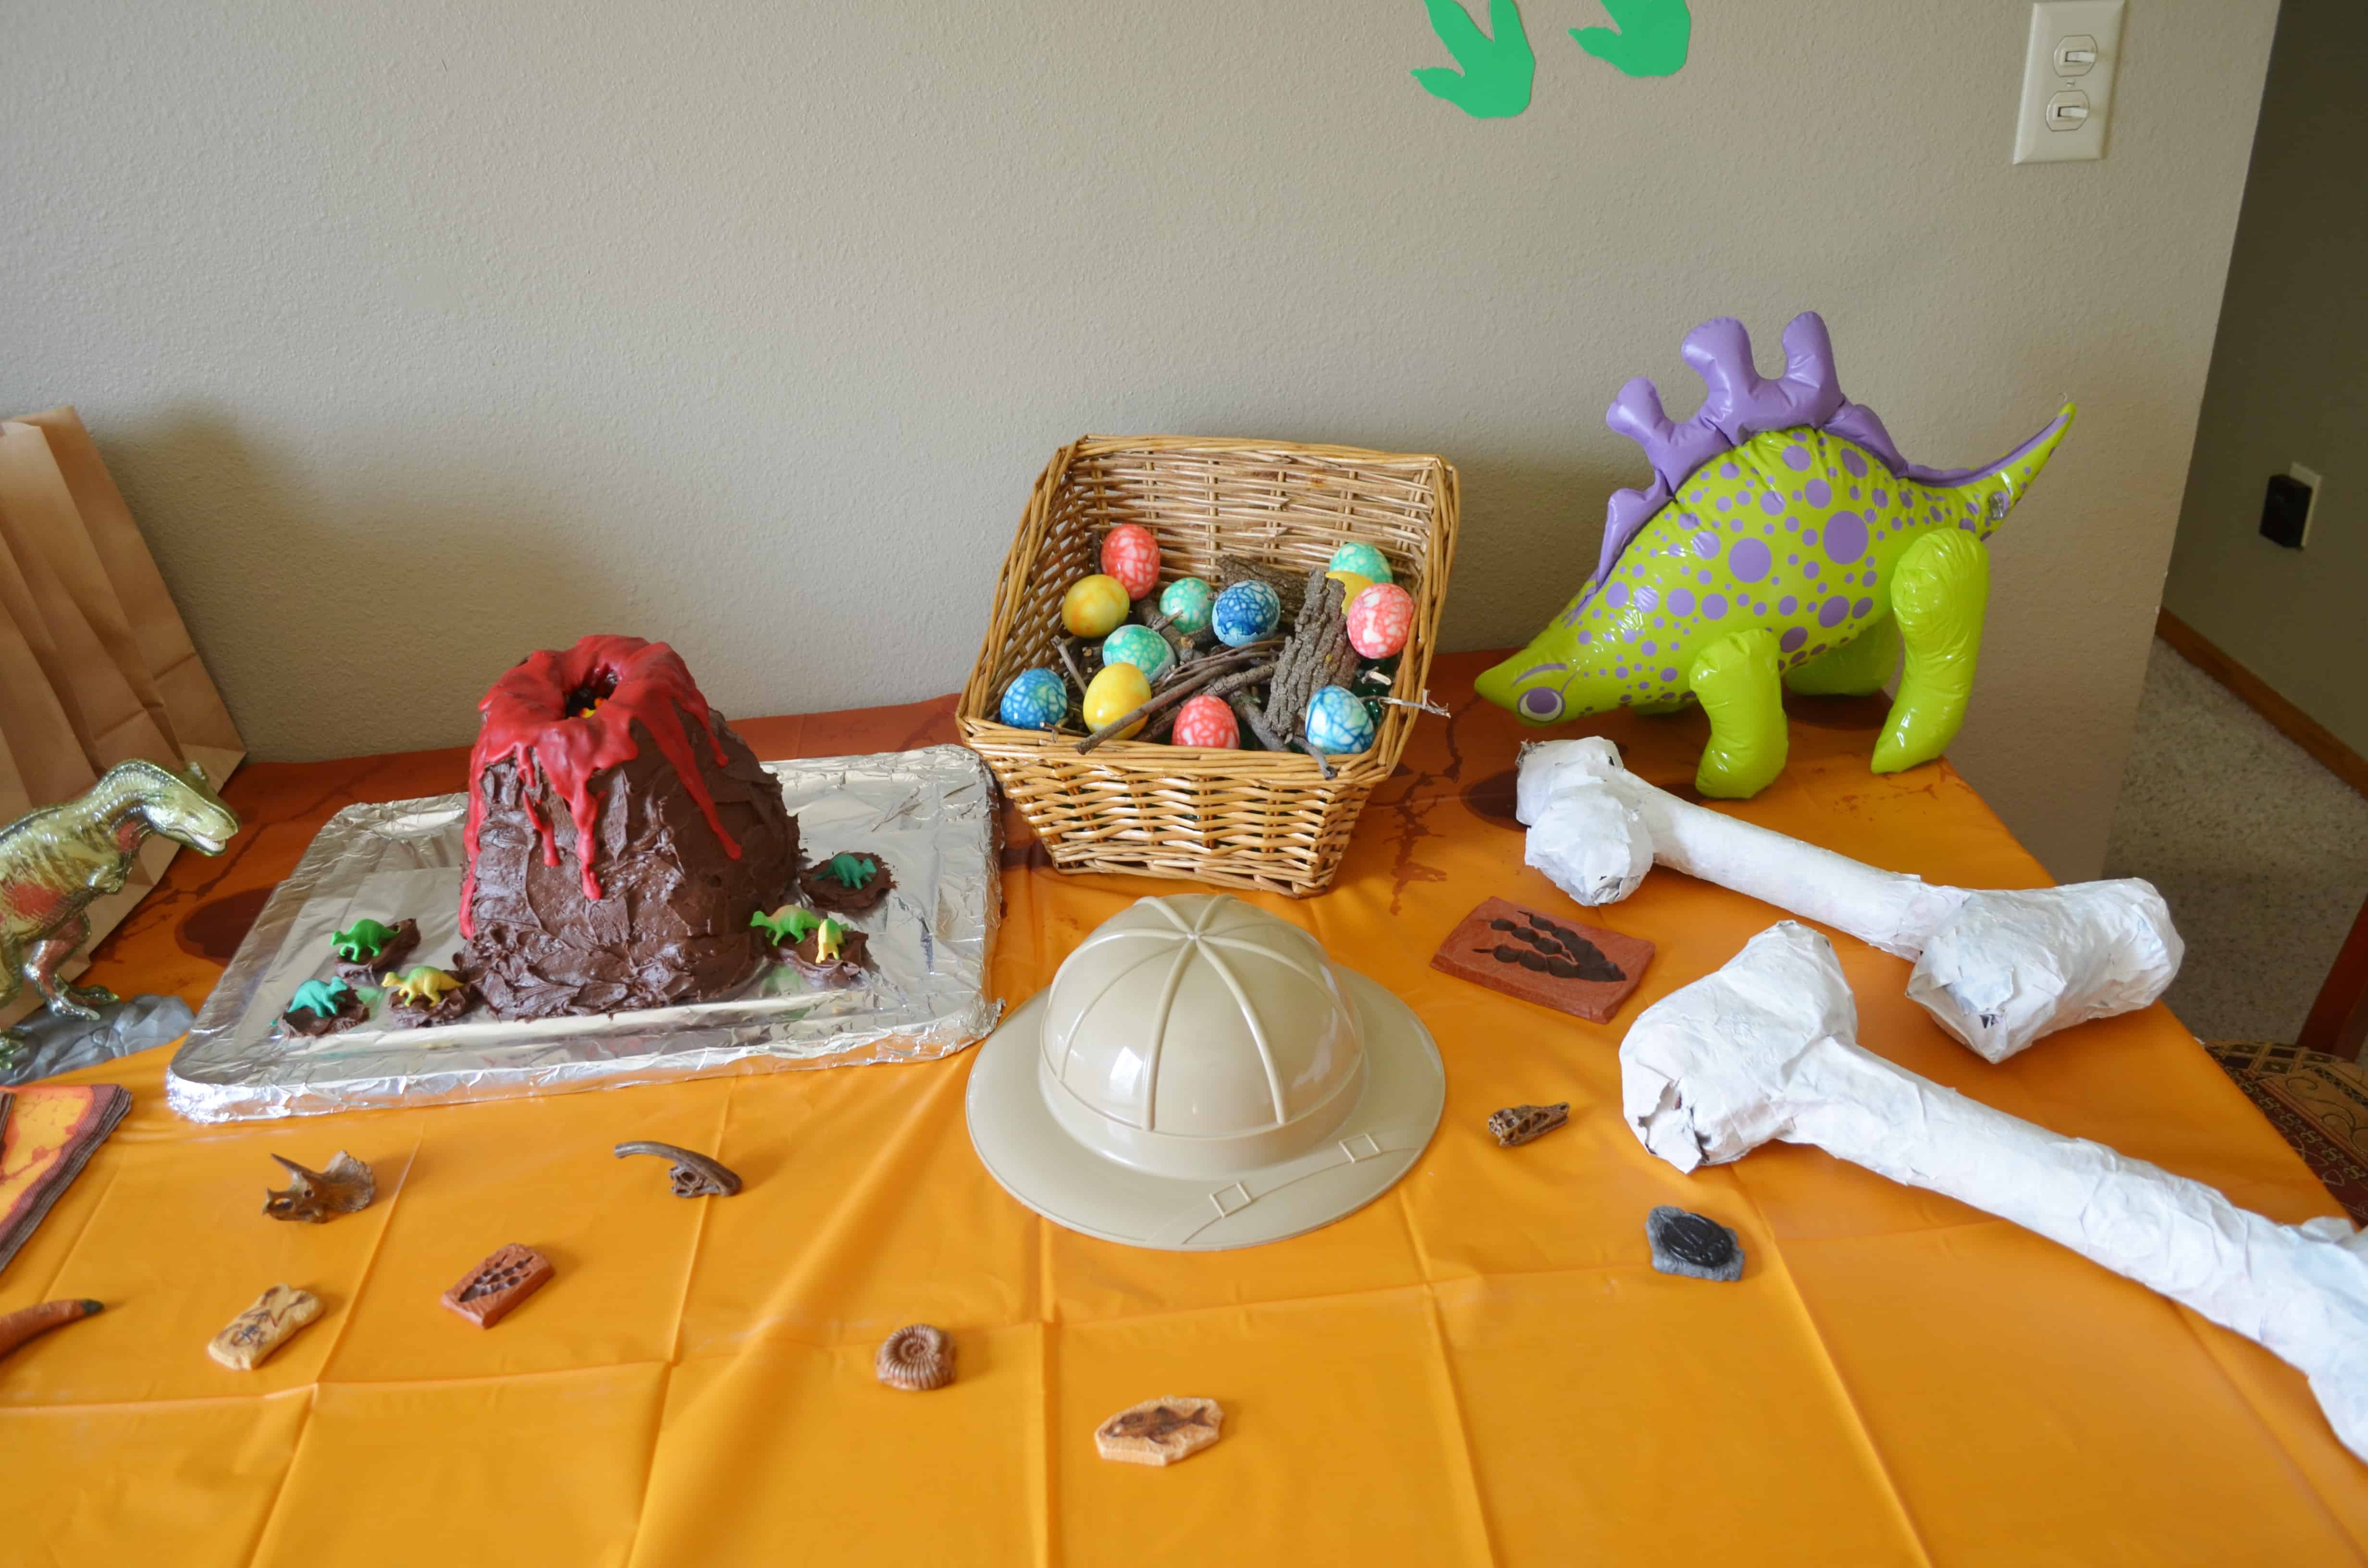 fossil-or-dinosaur-birthday-party-ideas-on-a-frugal-budget